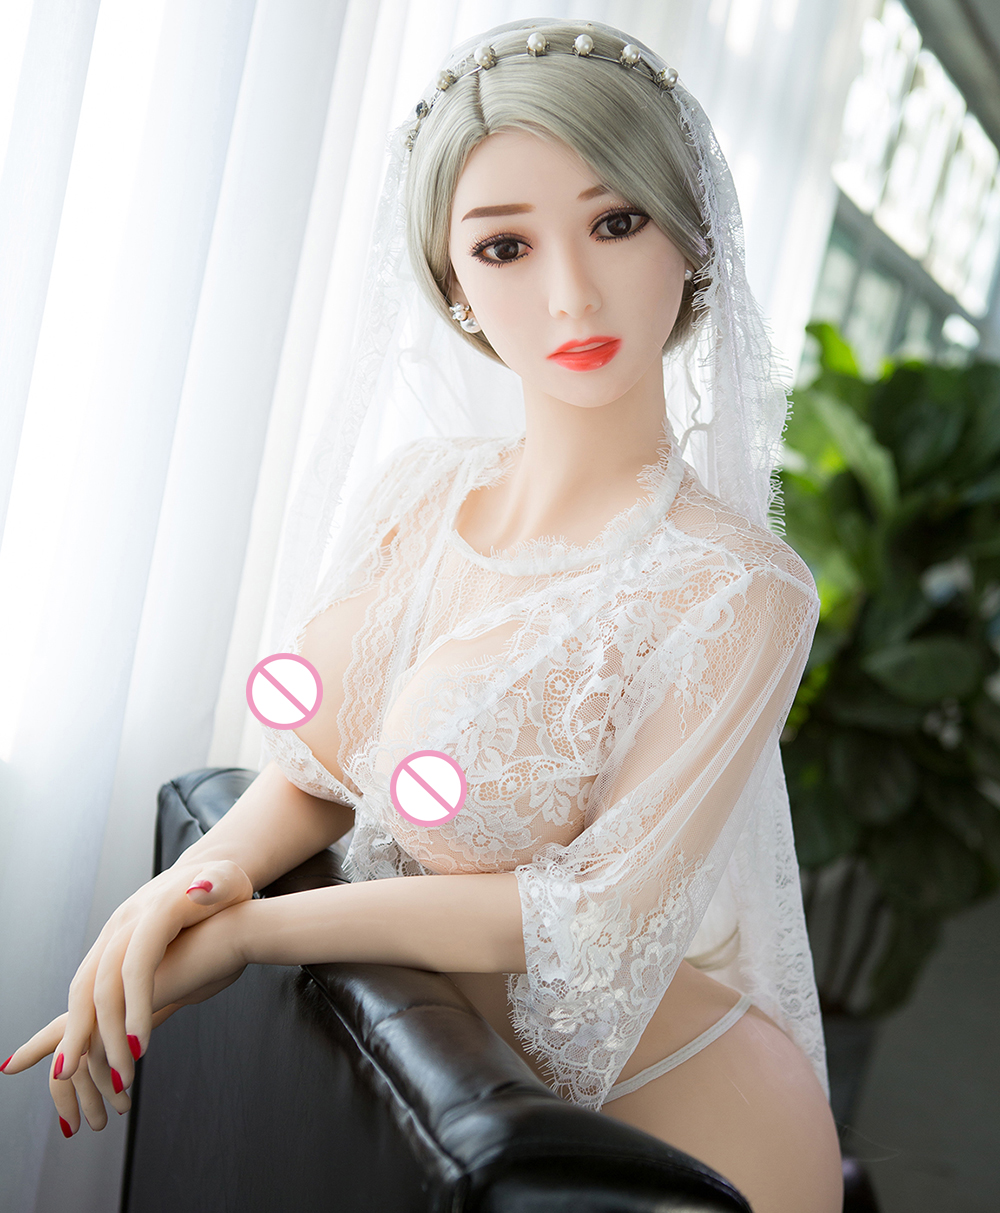 Young Girl Sex Doll For Men